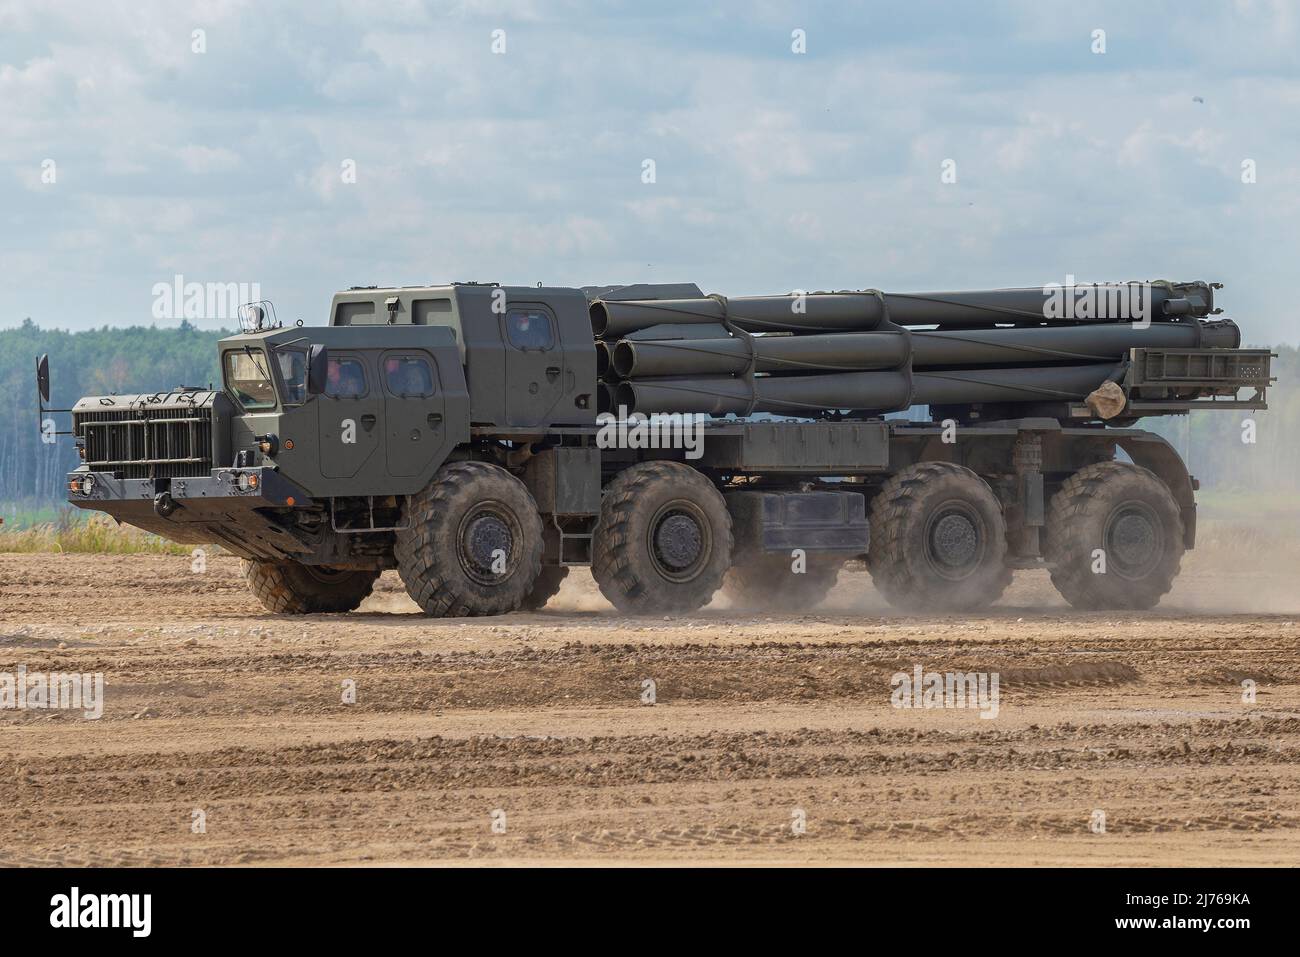 MOSCOW REGION, RUSSIA - AUGUST 25, 2020: Combat vehicle 9A52-2 of the Smerch multiple launch rocket system close-up Stock Photo